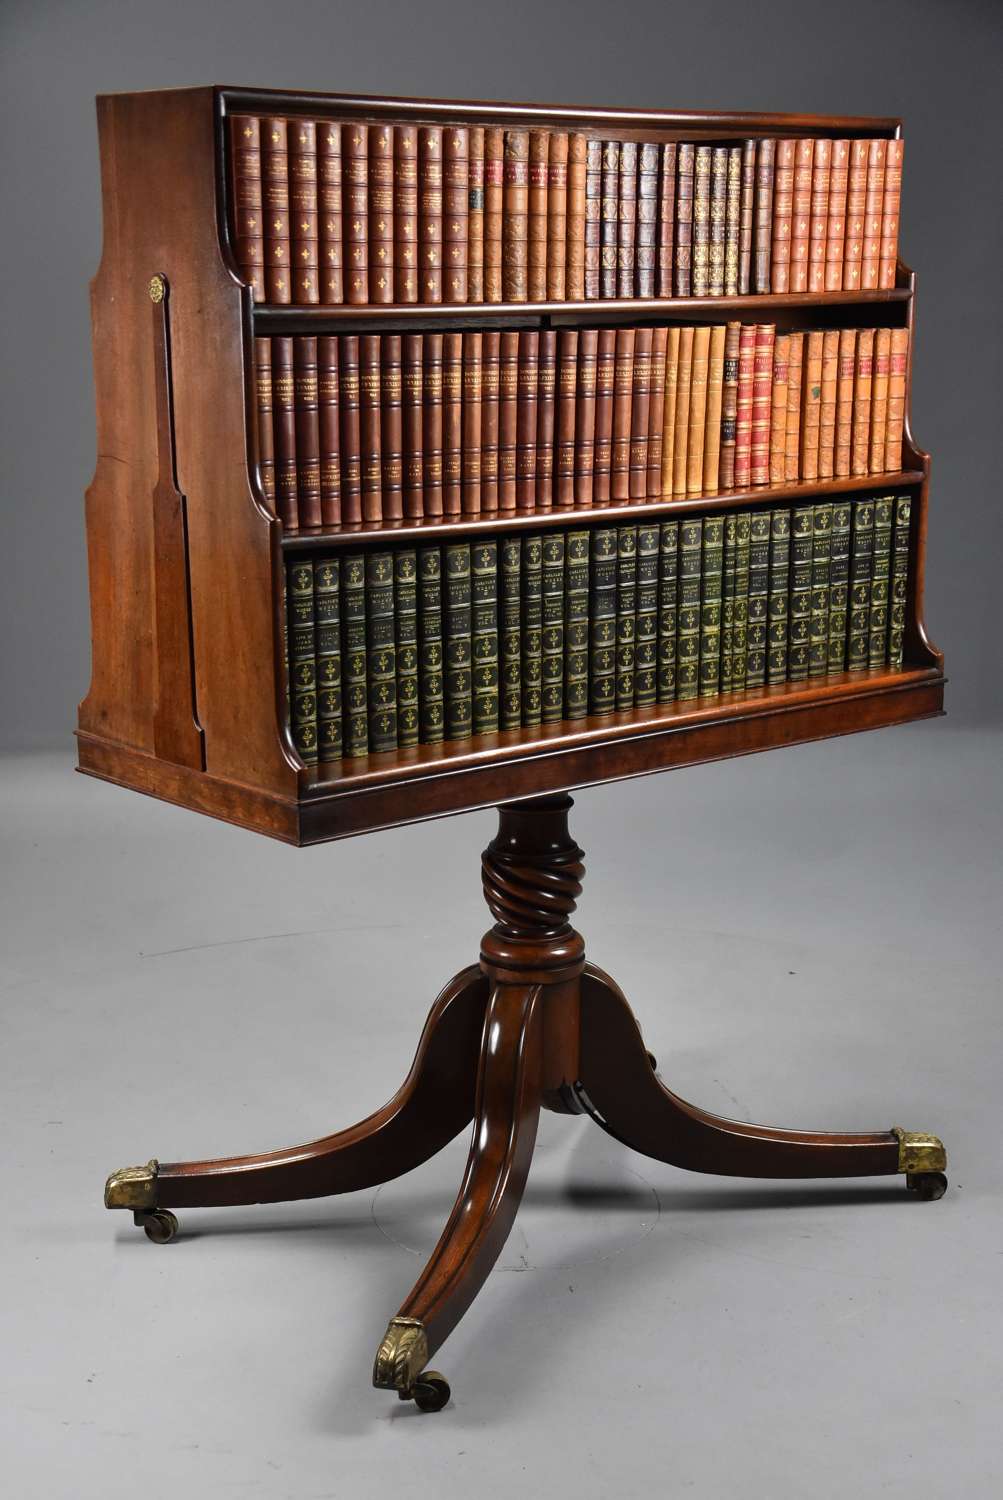 Extremely rare late 18th century mahogany pedestal waterfall bookcase